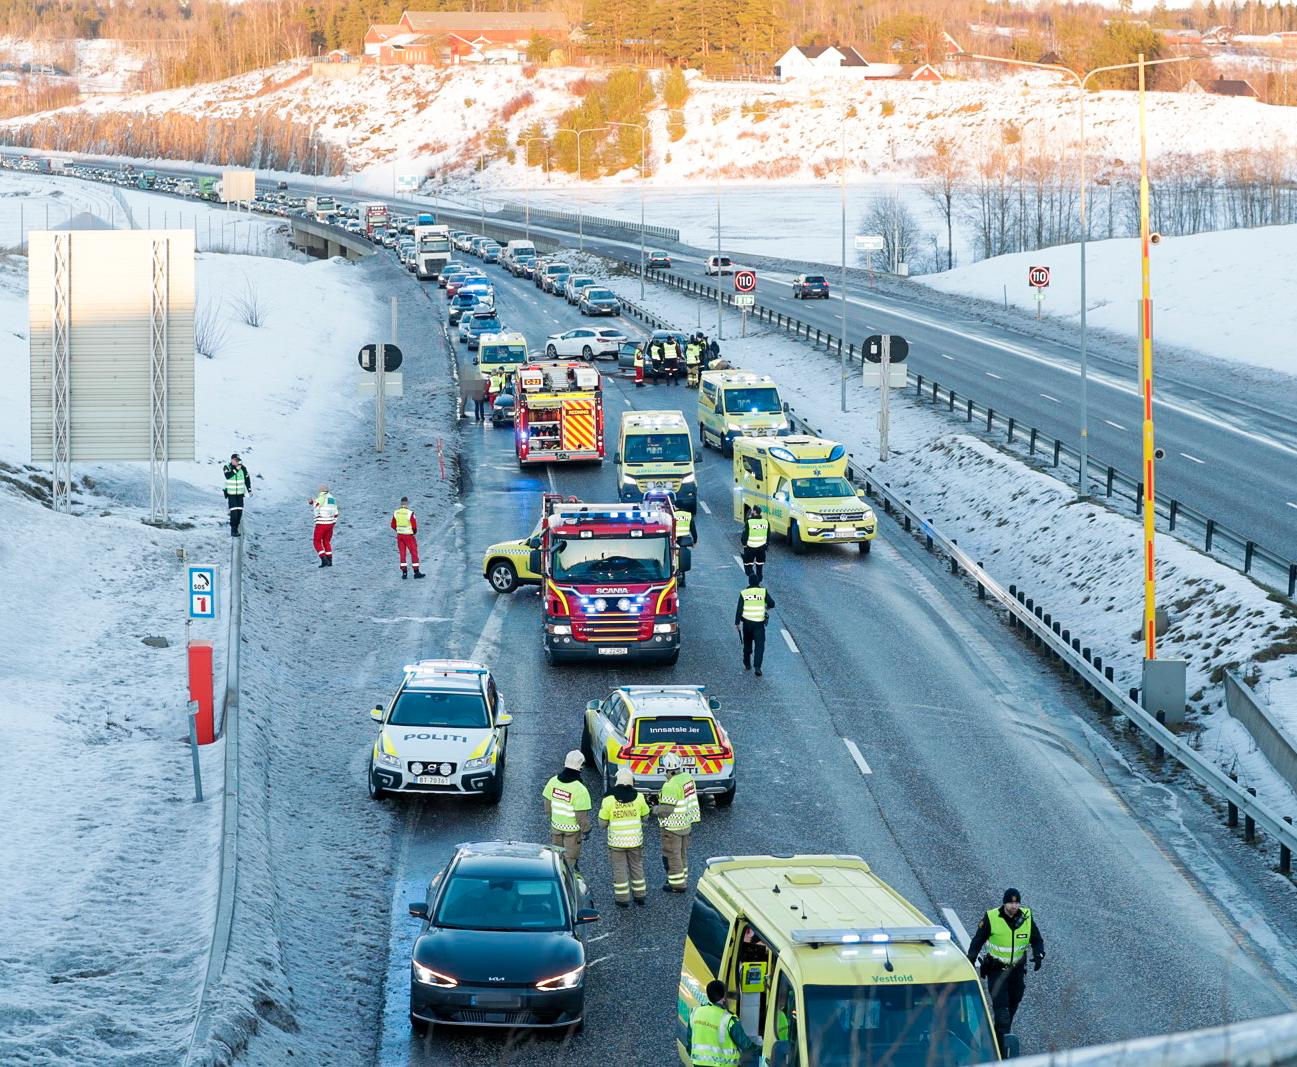 The E18 was opened after a traffic accident – probably involving 10 cars